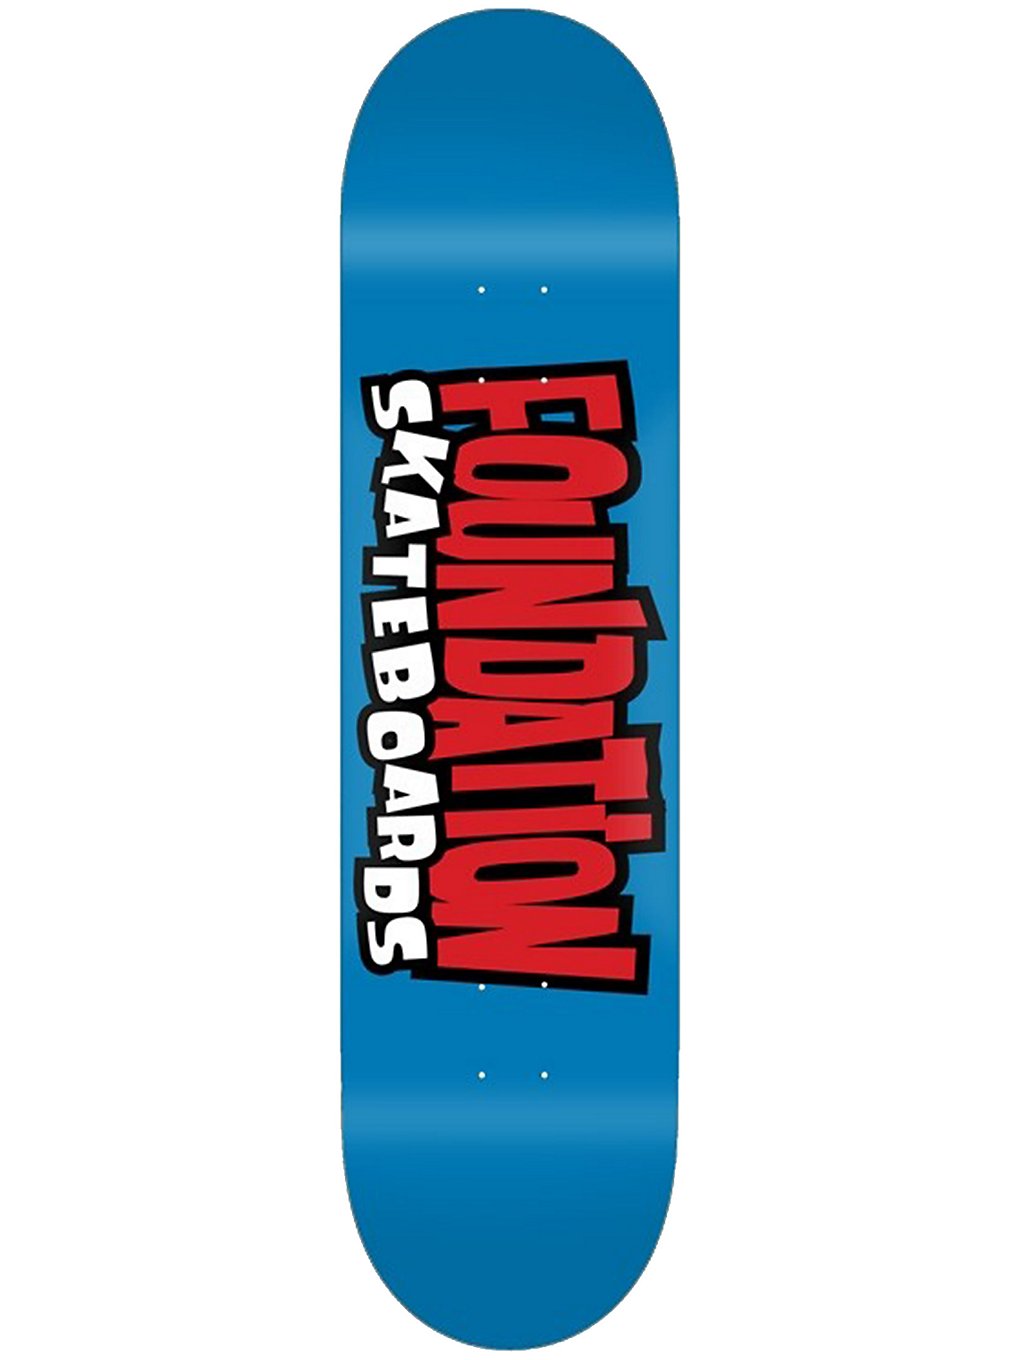 Foundation From The 90s 8.25" Skateboard Deck blue kaufen